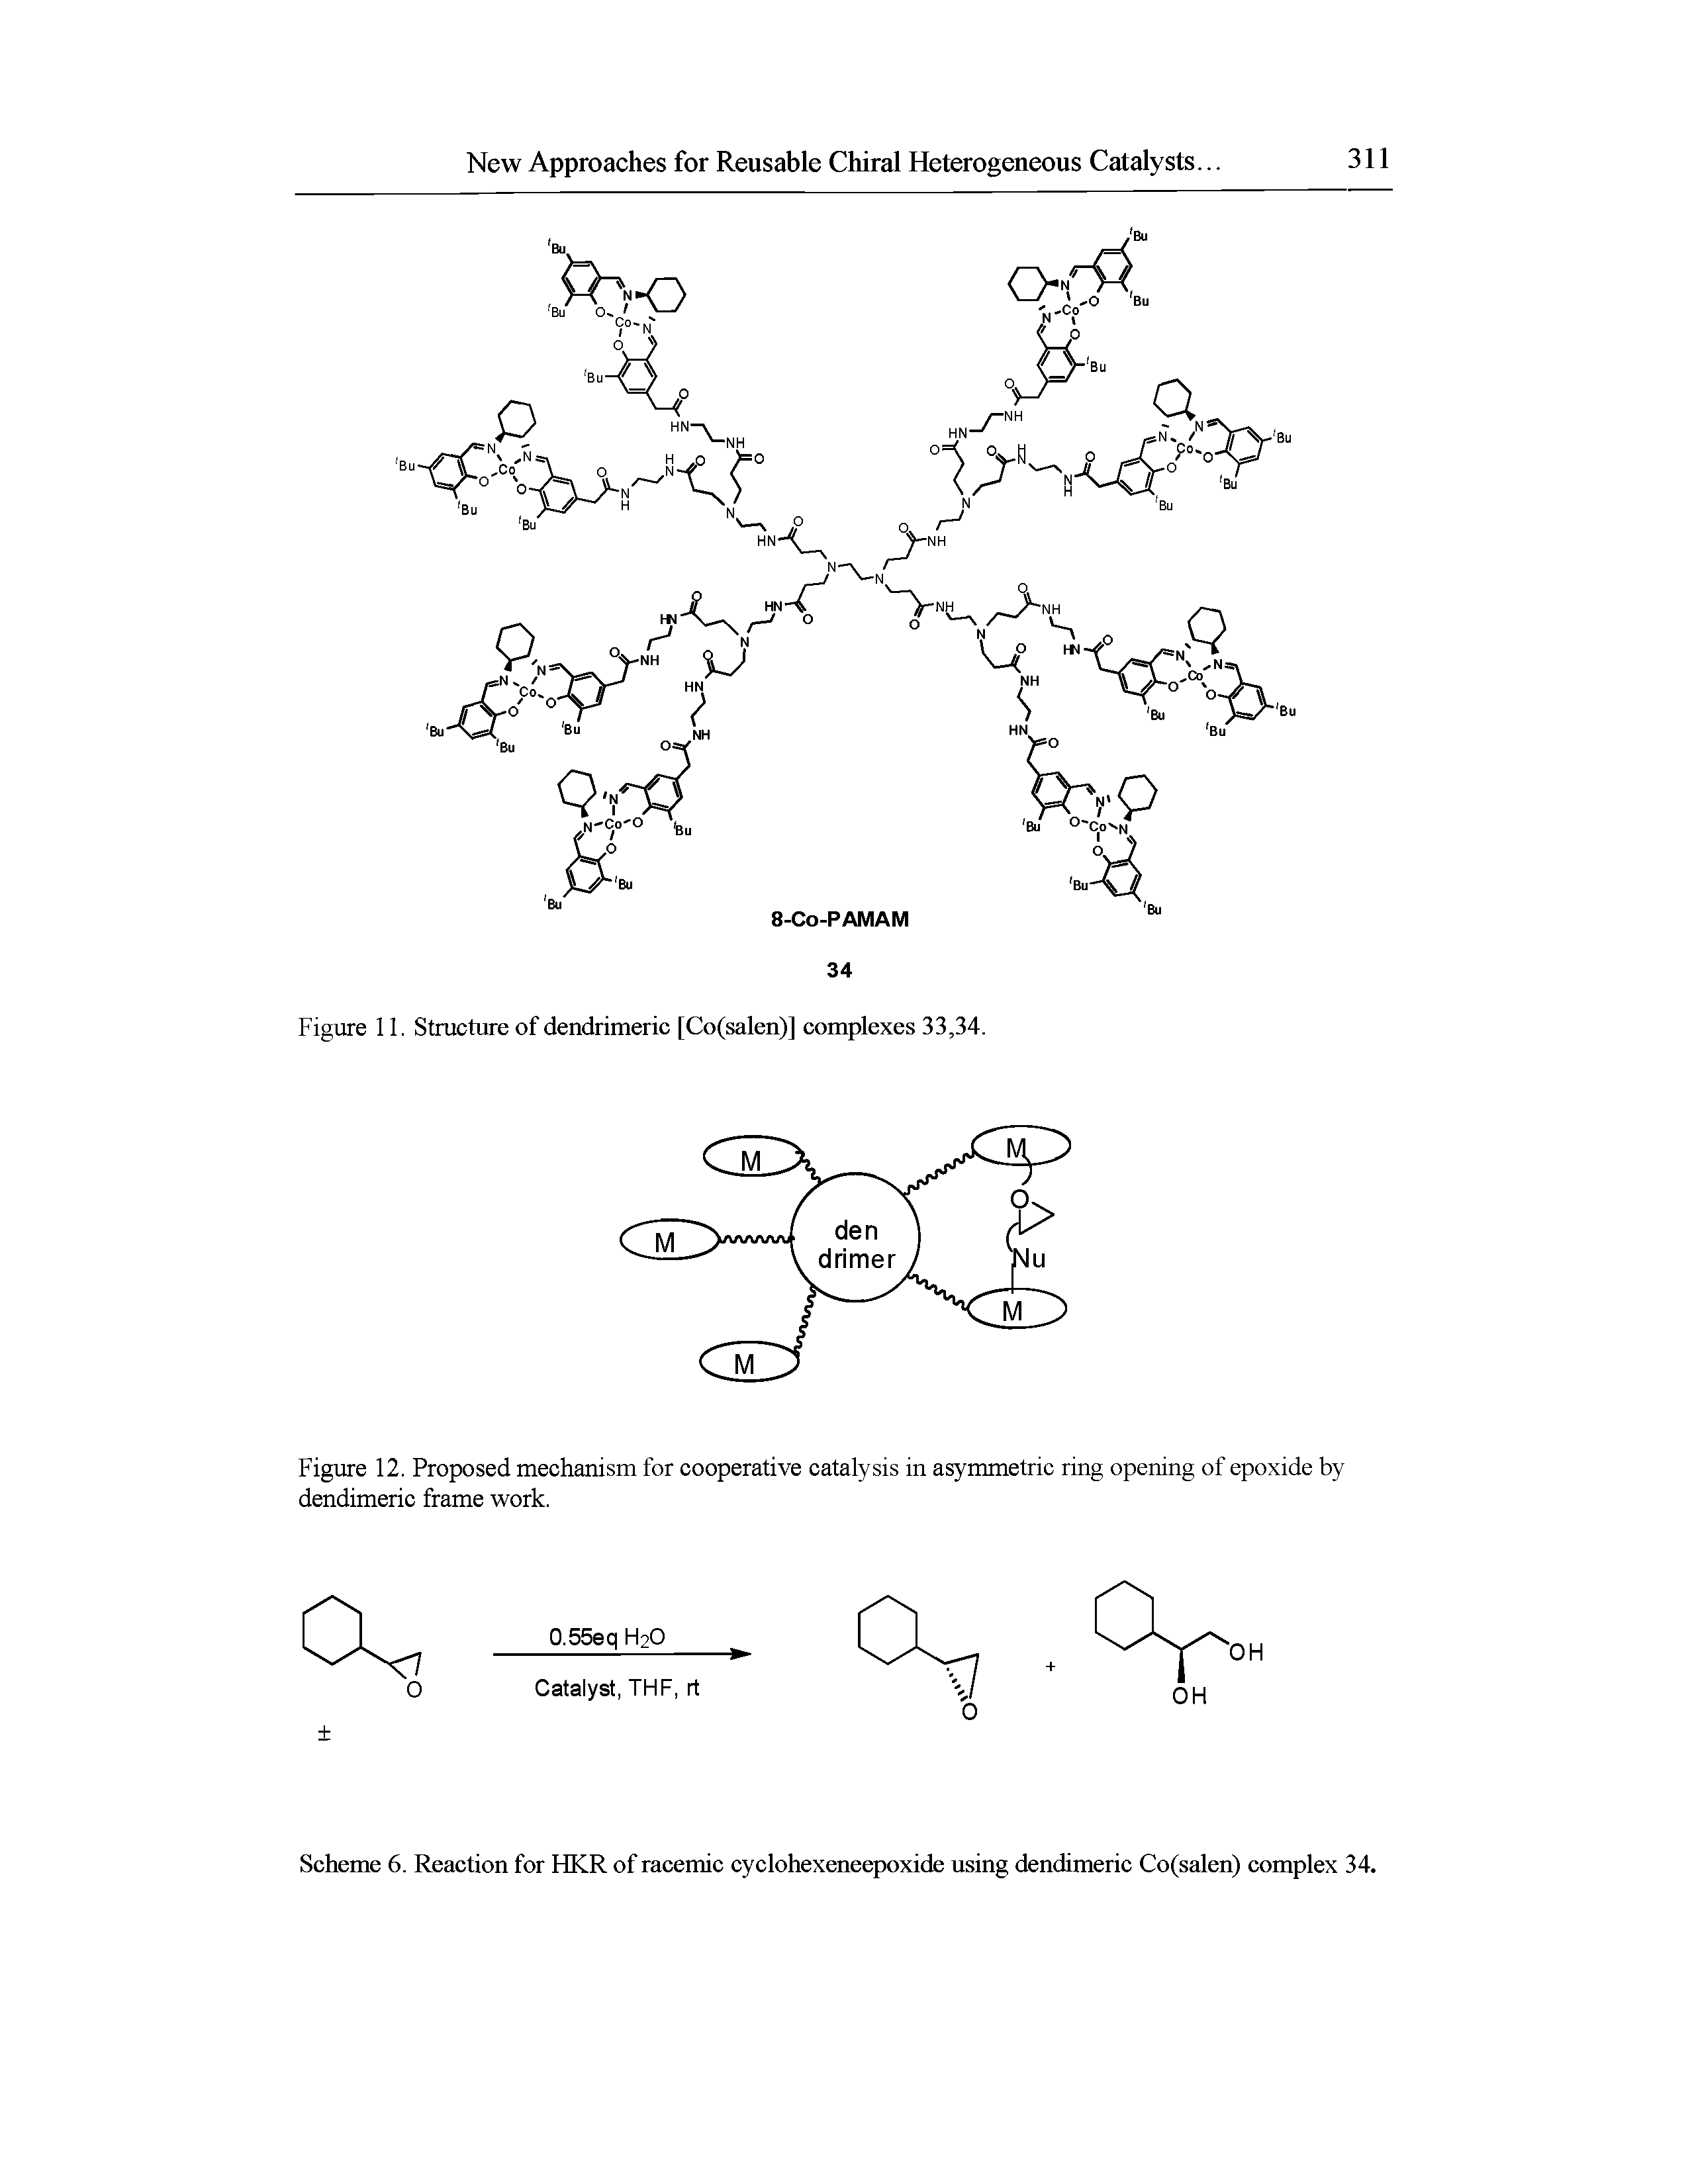 Figure 12. Proposed mechanism for cooperative catalysis in asymmetric ring opening of epoxide by dendimeric frame work.